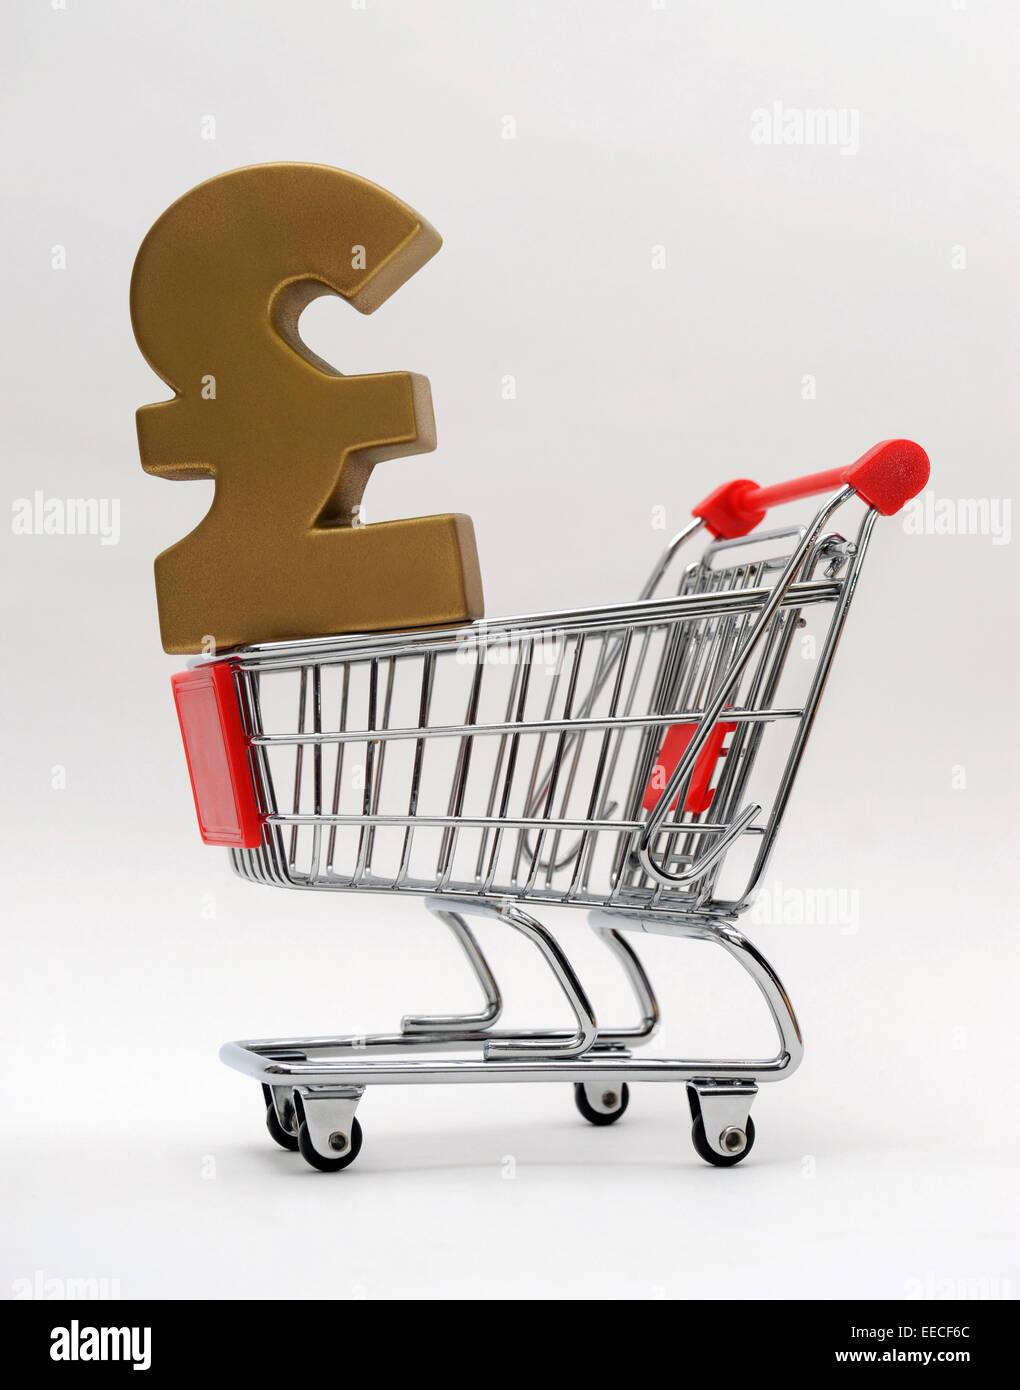 SUPERMARKET TROLLEY WITH BRITISH POUND SIGN RE PENSIONS ANNUITY FOOD PRICES COST OF LIVING HOUSEHOLD BUDGETS INCOMES SHOPPING Stock Photo